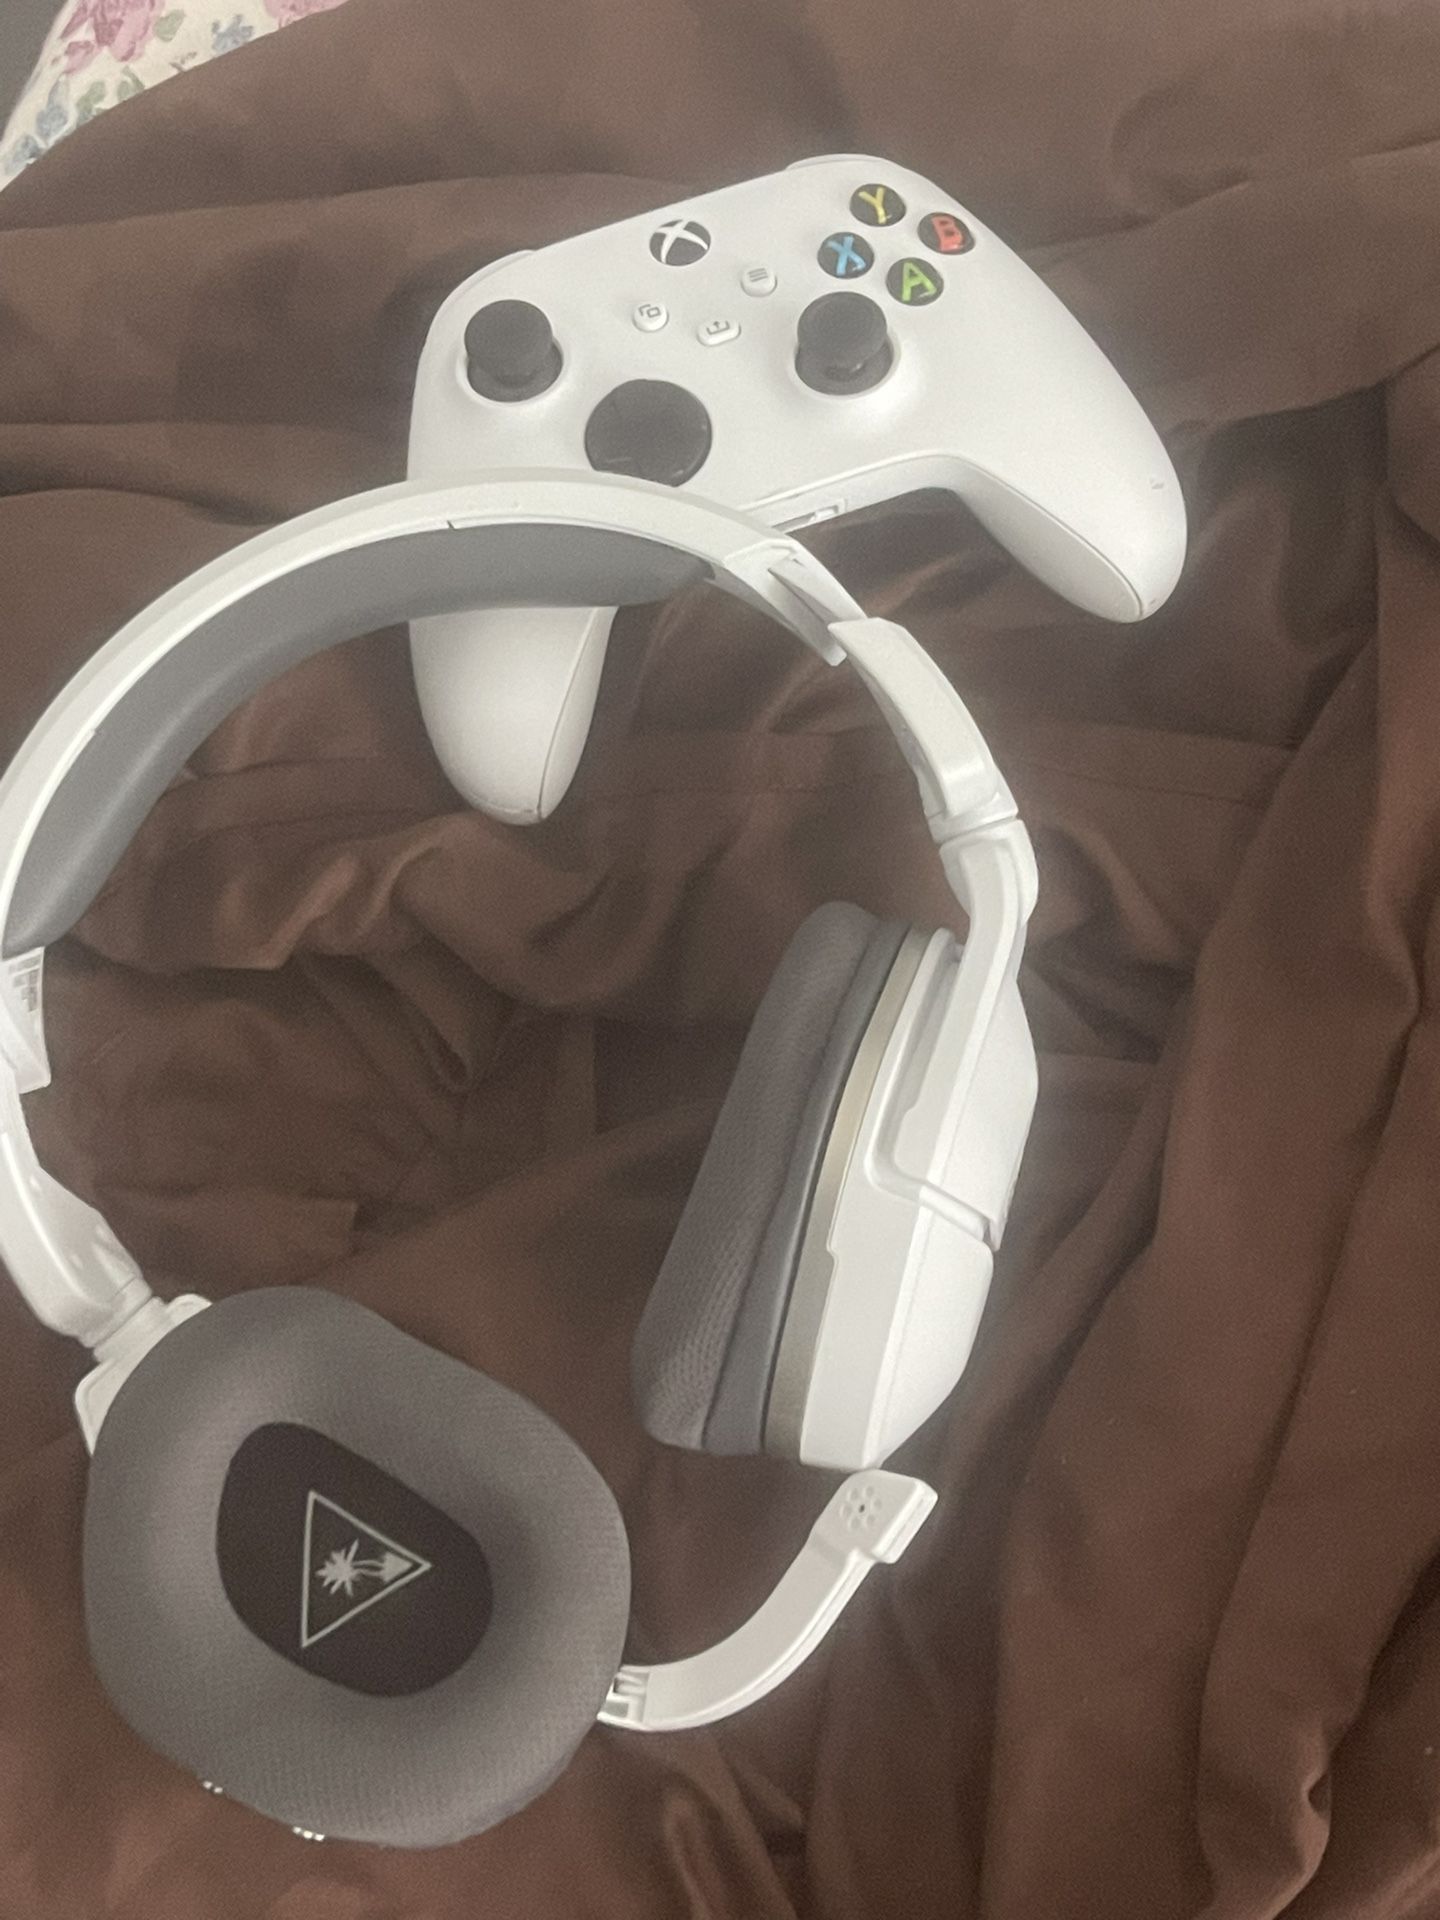 Xbox Next Gen Controller, And Turtle Headset Series S